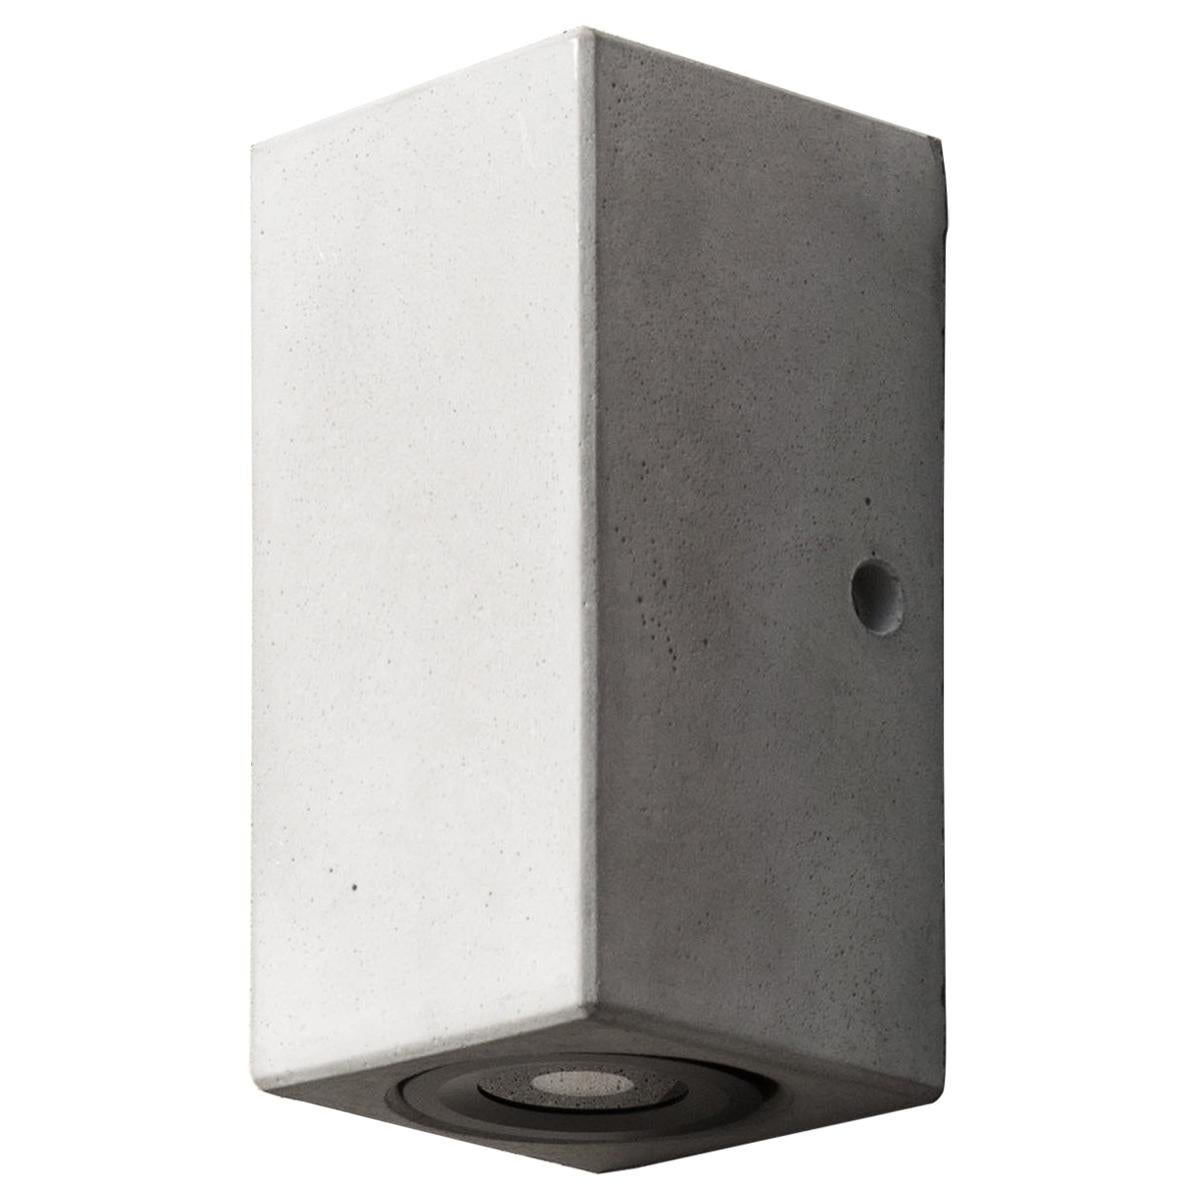 Concrete and Aluminum Wall Lamp, “D, ” M, from Concrete Collection by Bentu